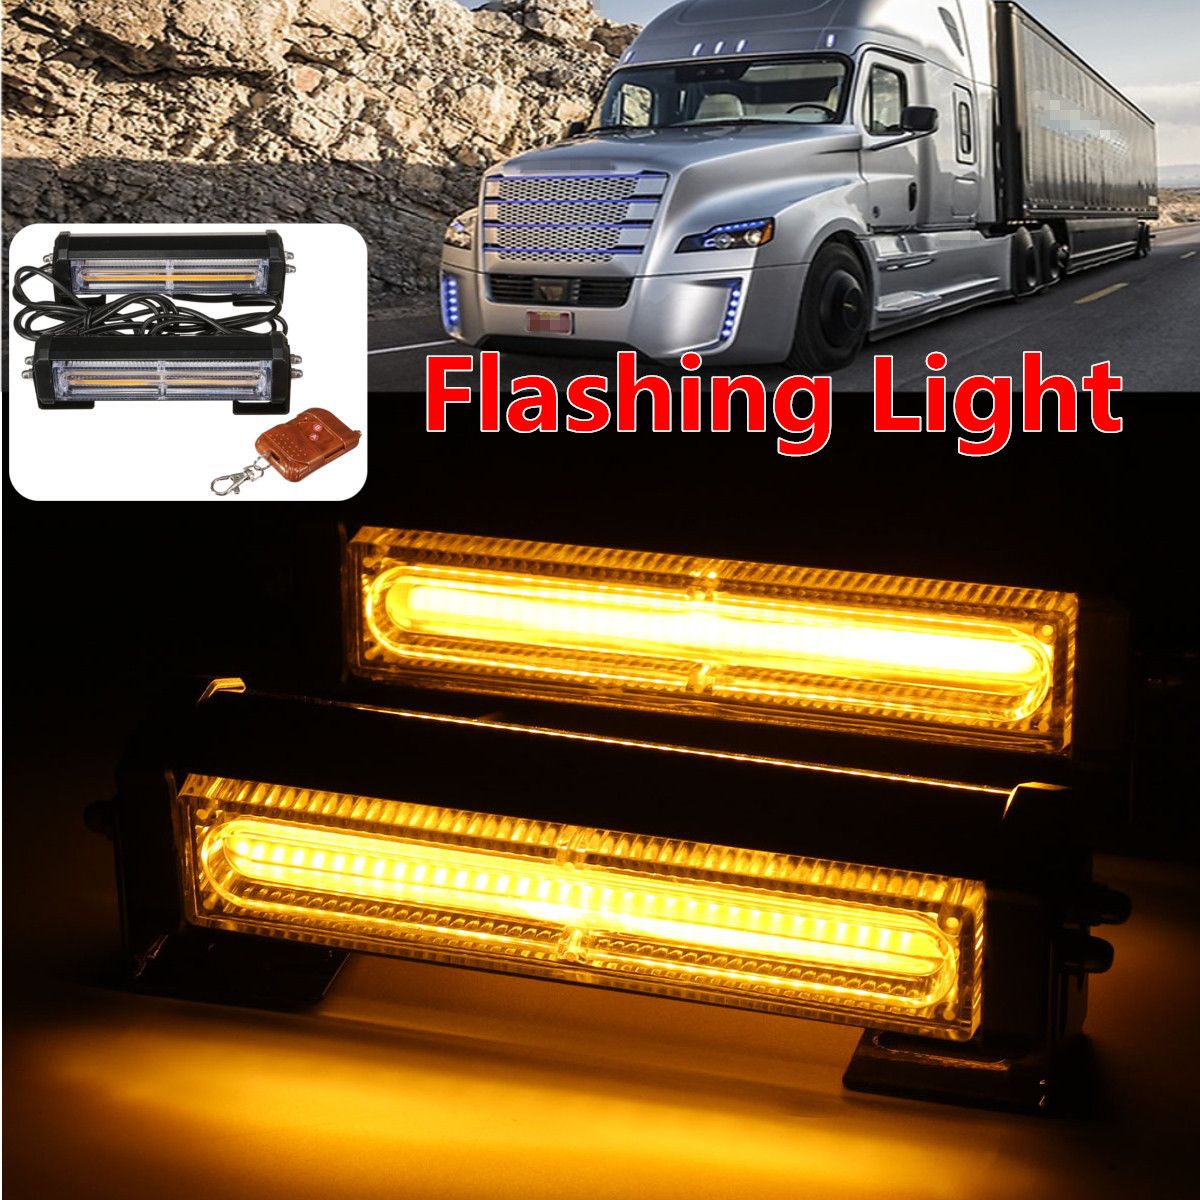 COB-LED-Car-Front-Grille-Flashing-Lights-Emergency-Warning-Strobe-Lamp-Bars-Amber-with-Remote-1421457